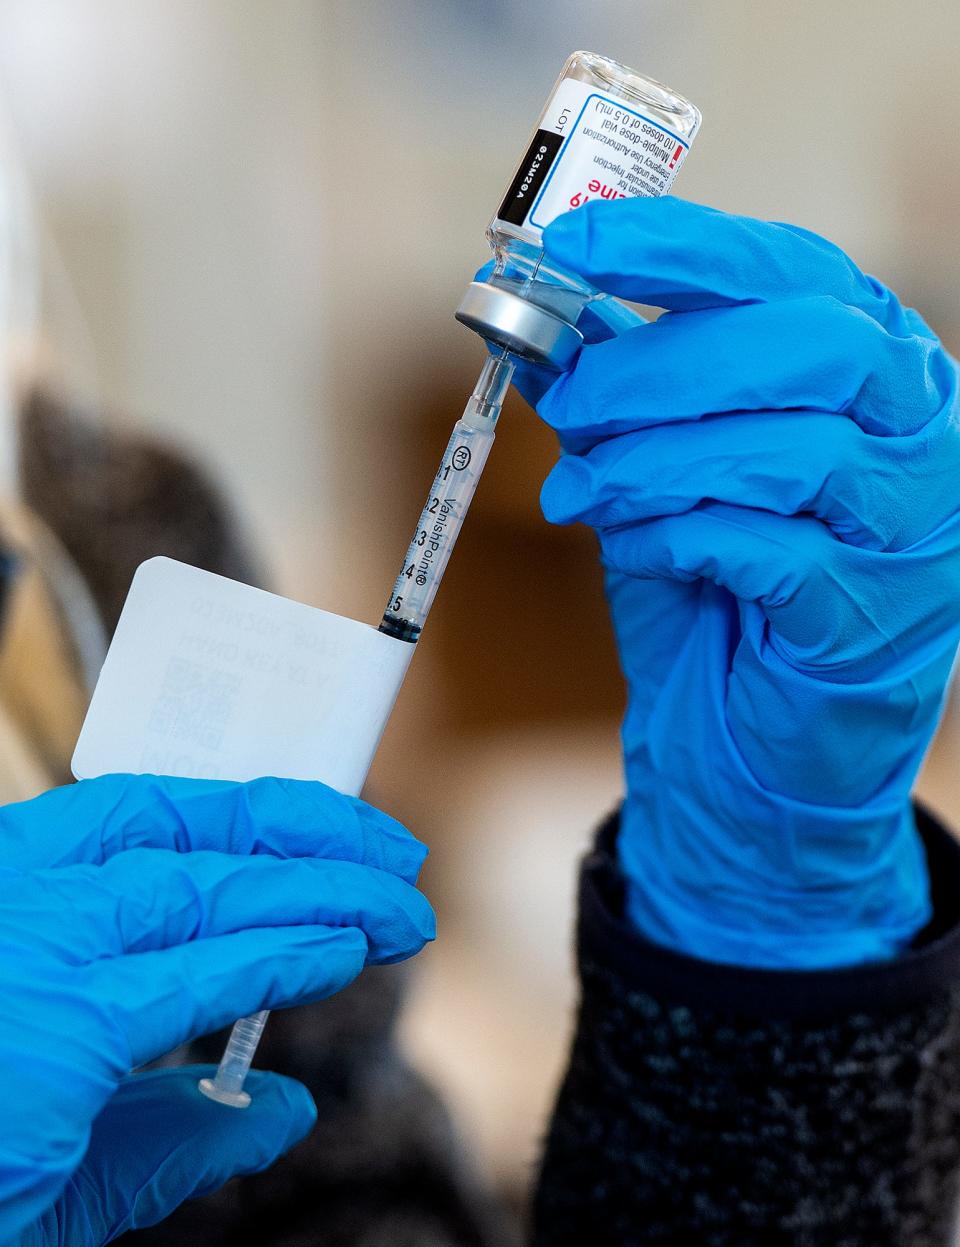 An AMI employee prepares one of the Moderna COVID-19 vaccines, at the Lower Bucks Campus of the Bucks County Community College in Bristol Township, on Tuesday, Feb. 16, 2021.